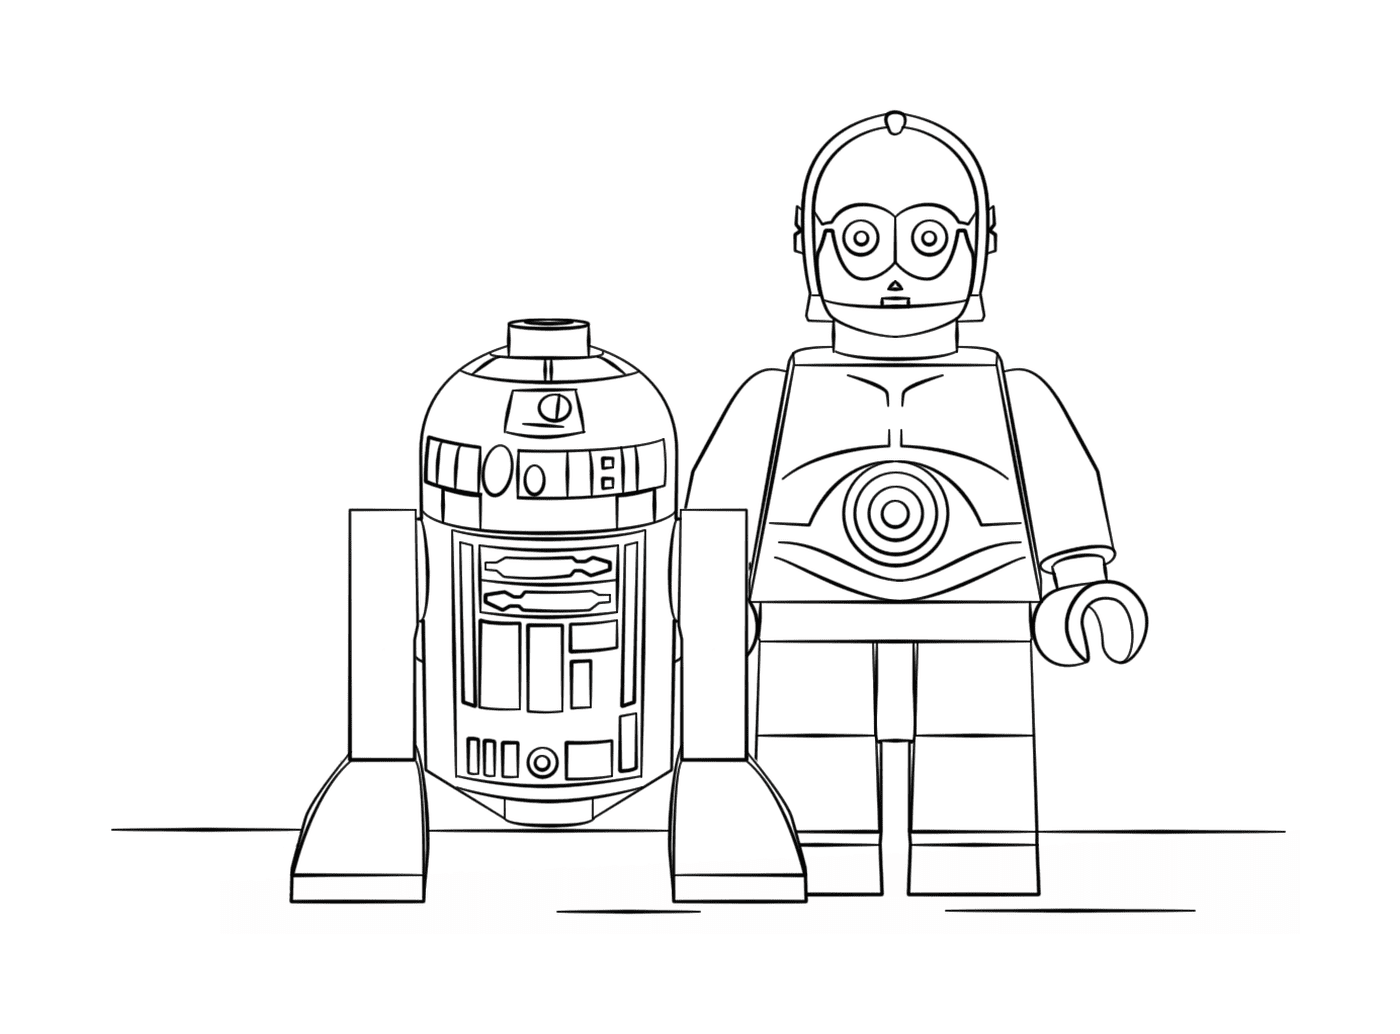  R2D2 and C3PO: The Lego Star Wars universe 